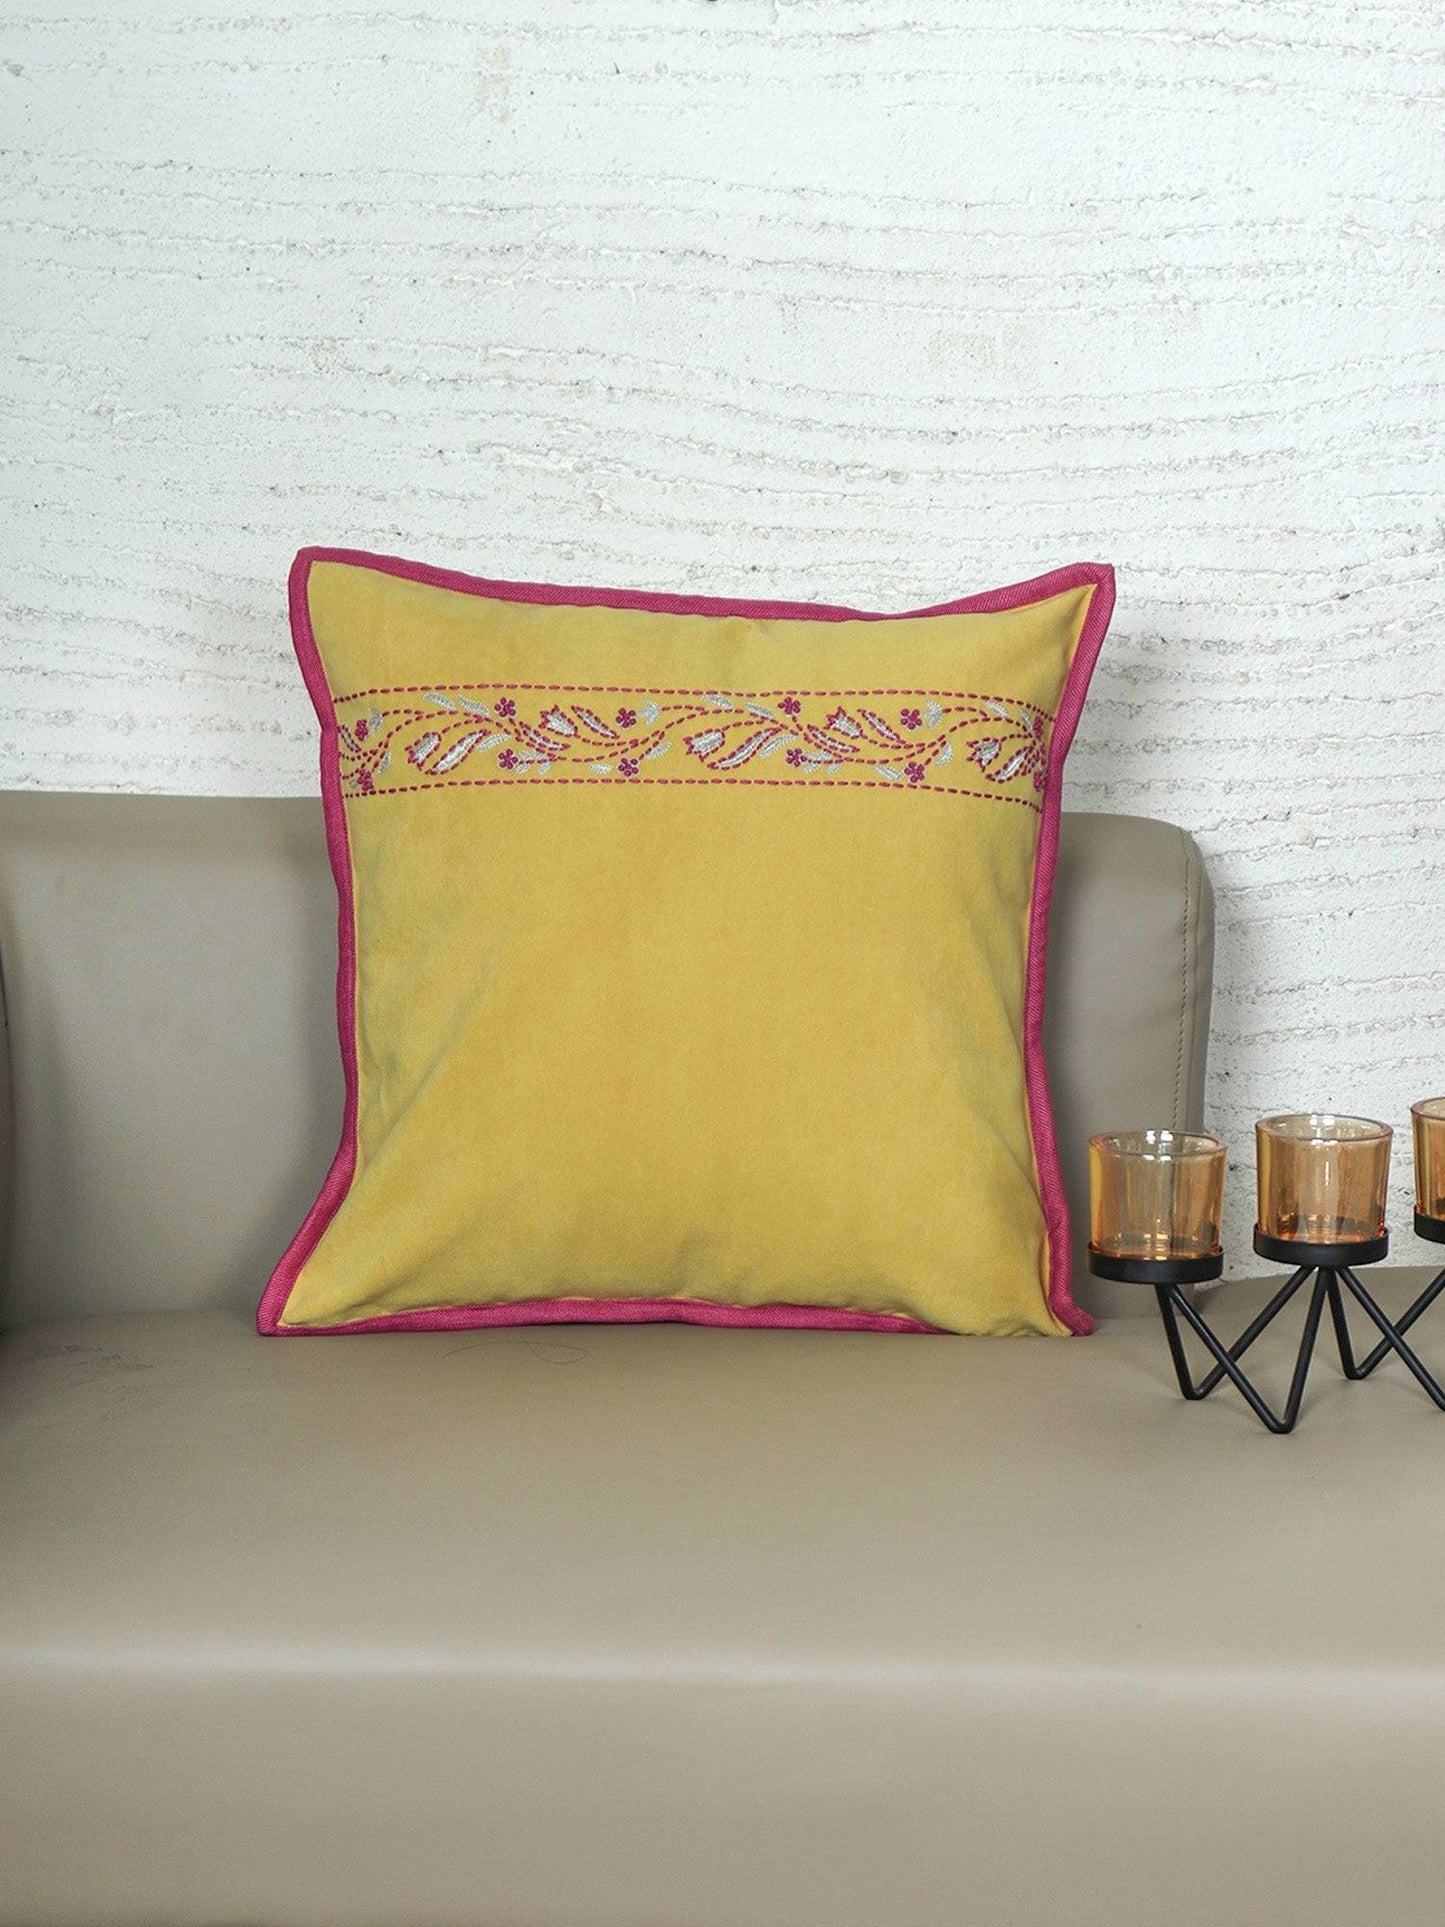 ZEBA World Hand Embroidered Cushion Cover - Luxe Collection | Sofa, Bedroom, Couch | Polycanvas Floral Embroidery with Flange Border - Yellow - 16x16 inch (40x40 cms) (Pack of 1)